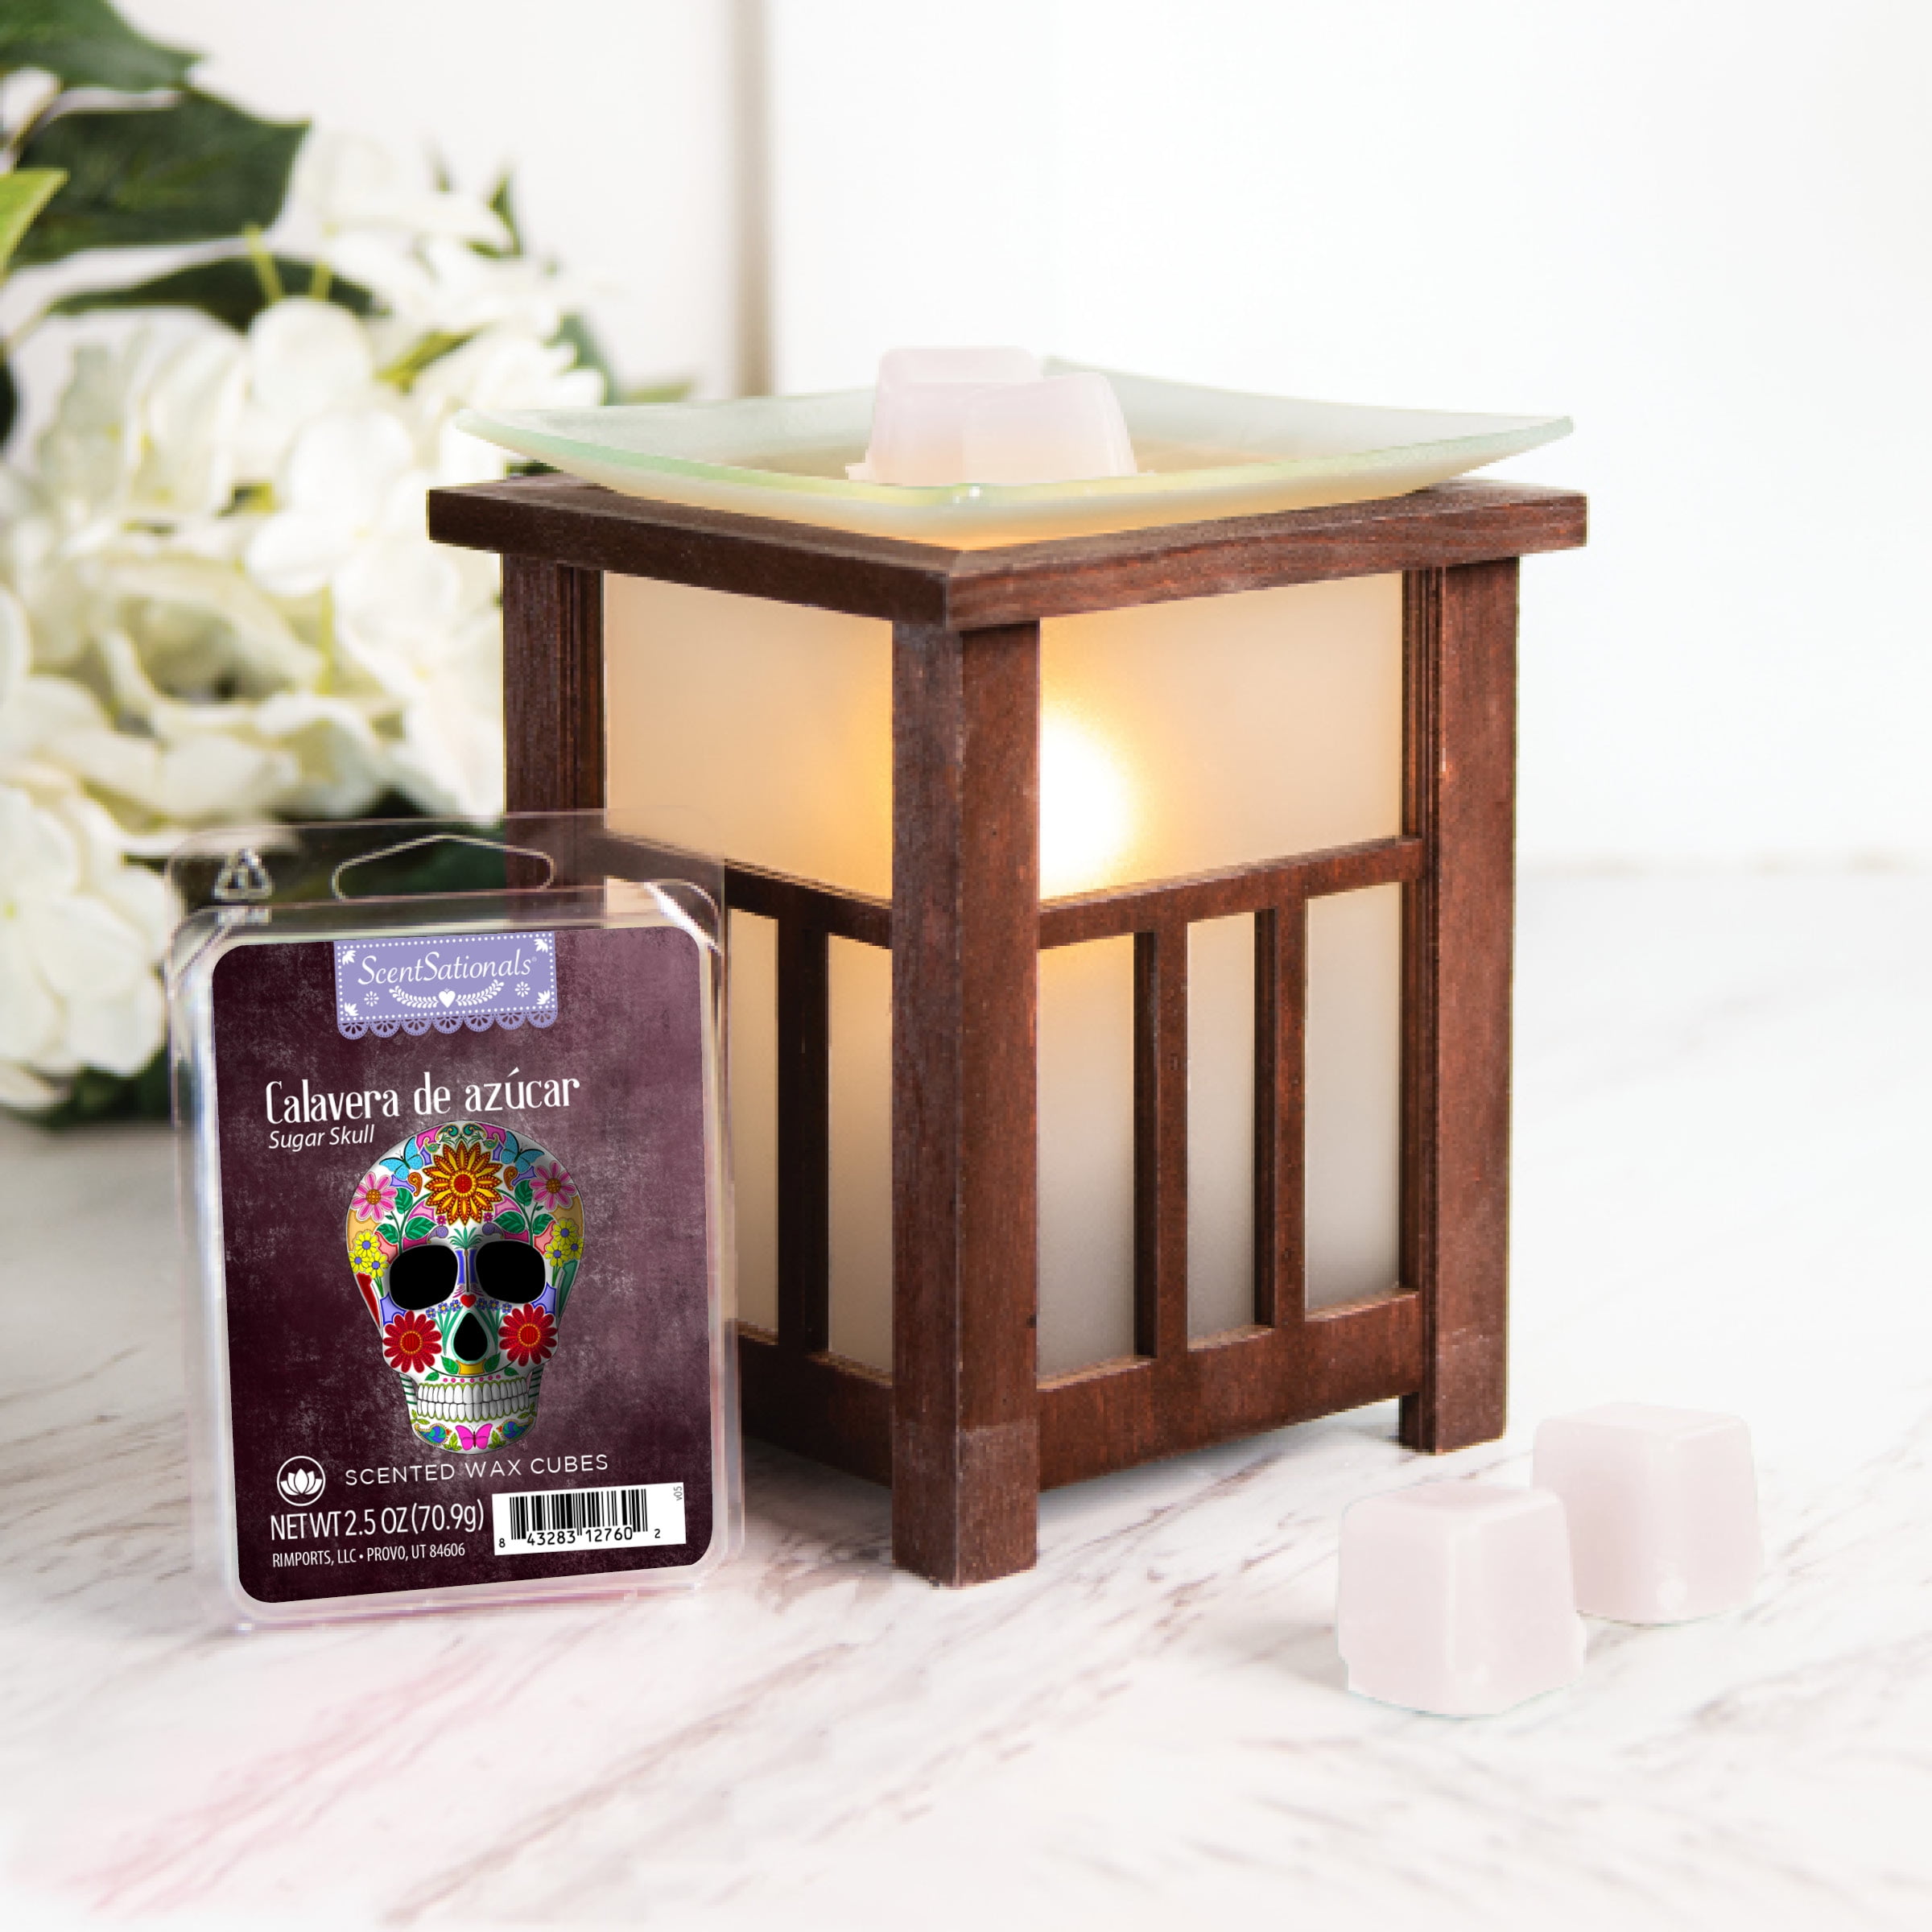 SCENTSATIONALS SCENTED WAX MELT CUBES 70.9g HIGHLY SCENTED.FREE UK